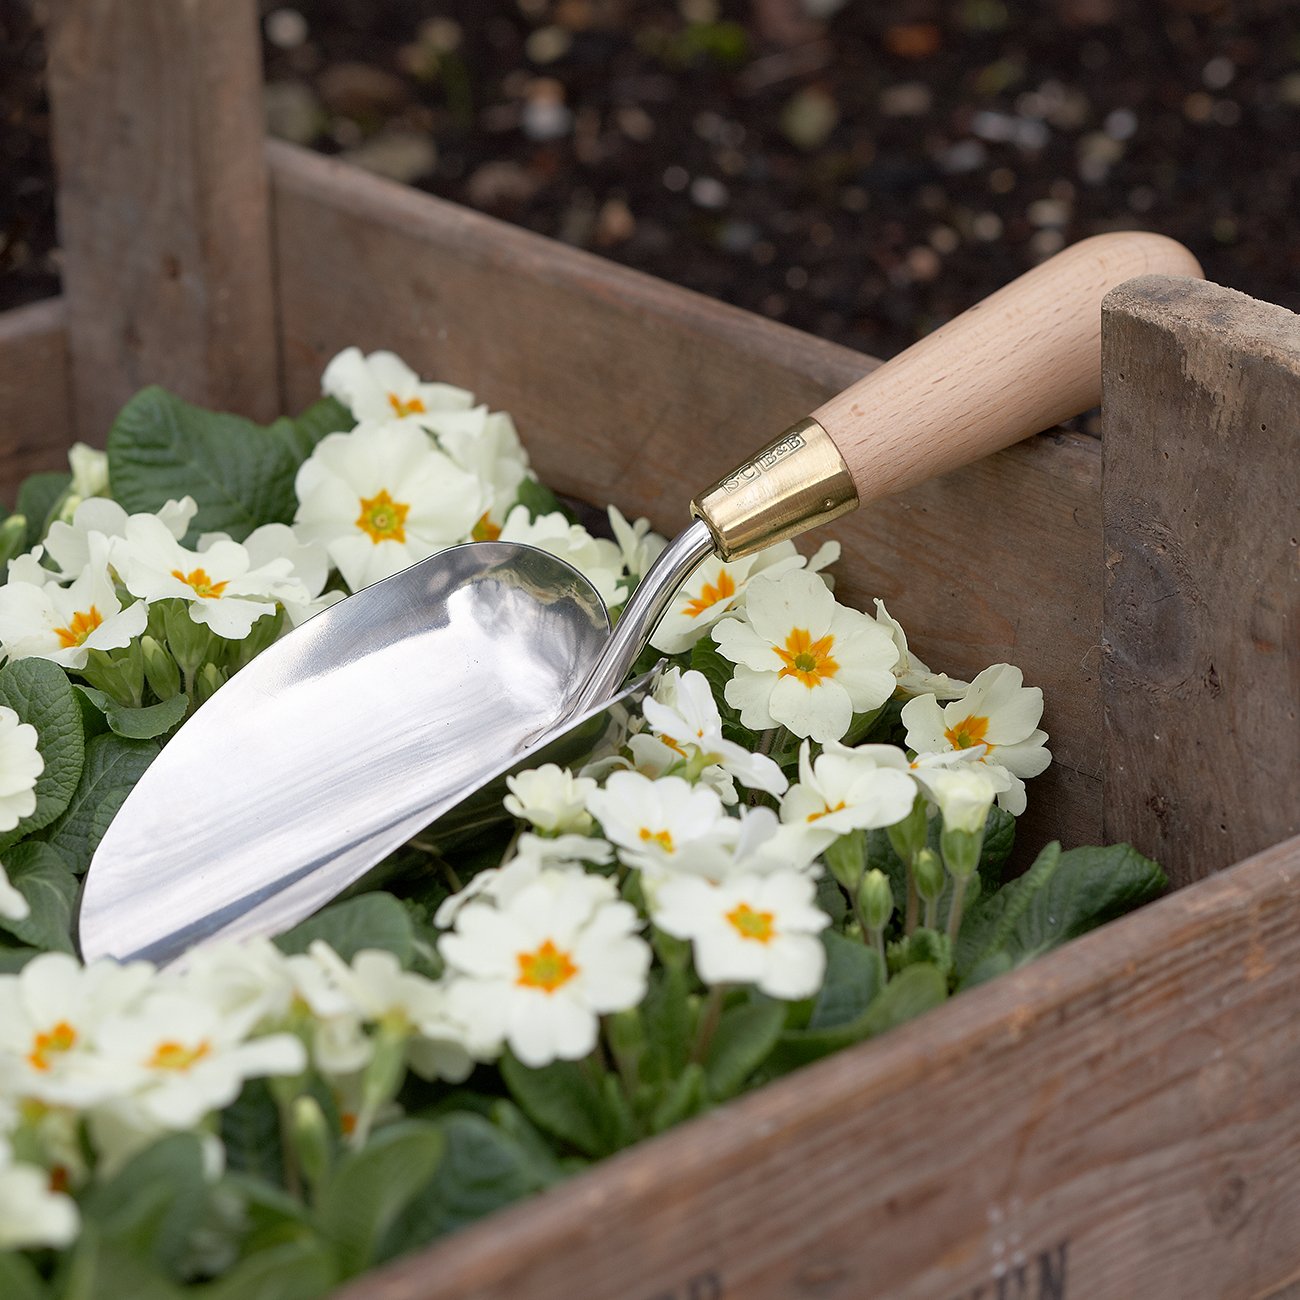 Combining designer flair with practicality, this garden trowel is a delight to use. Smaller and lighter than some hand trowels, it offers excellent control and comfort in use.